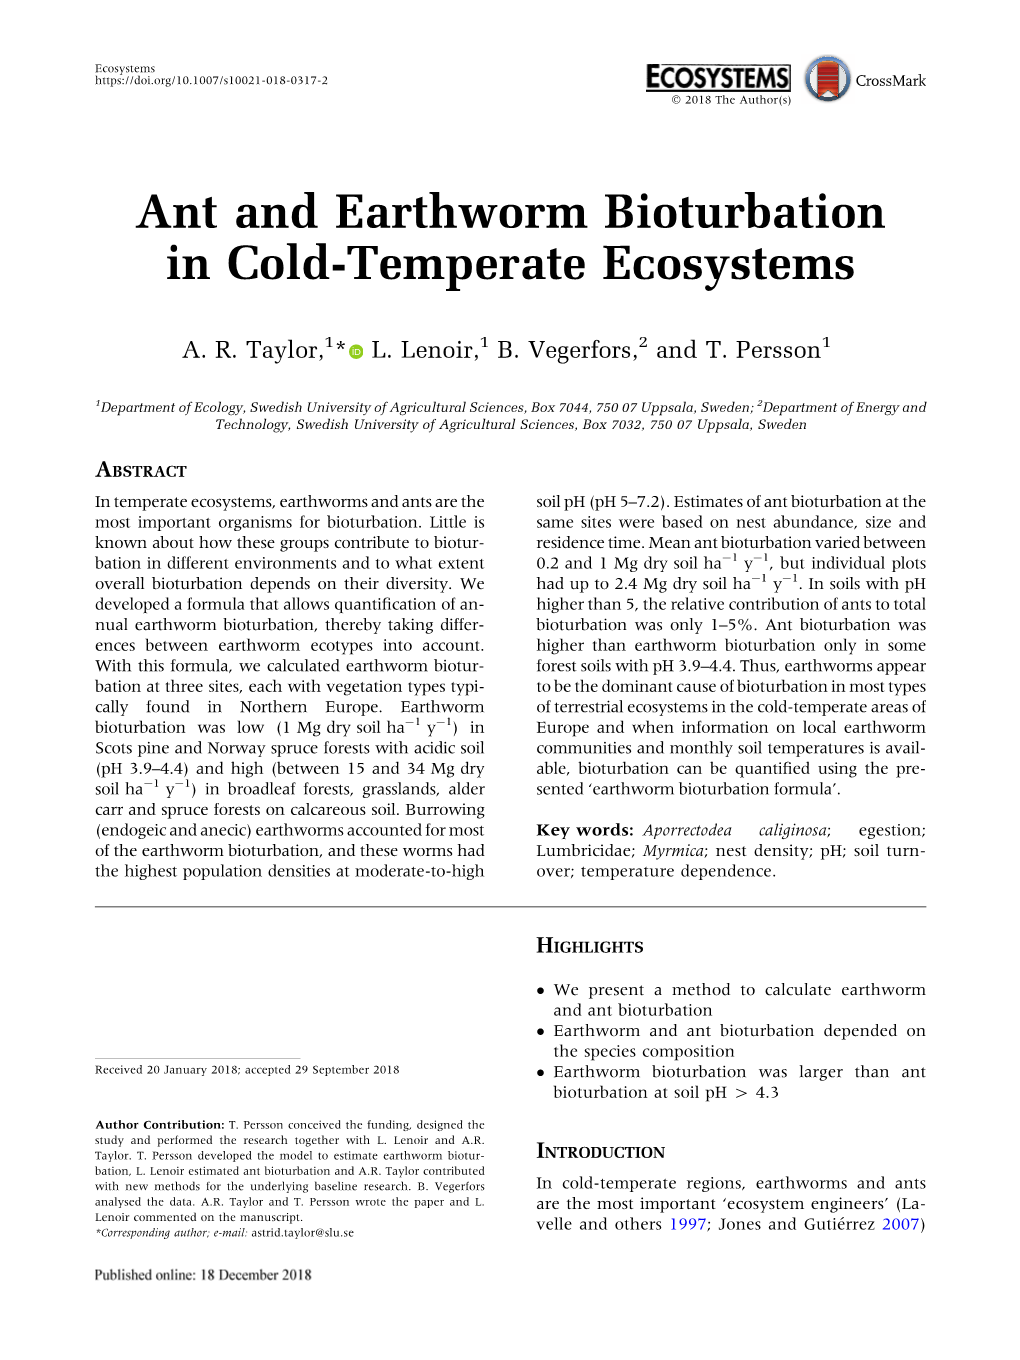 Ant and Earthworm Bioturbation in Cold-Temperate Ecosystems